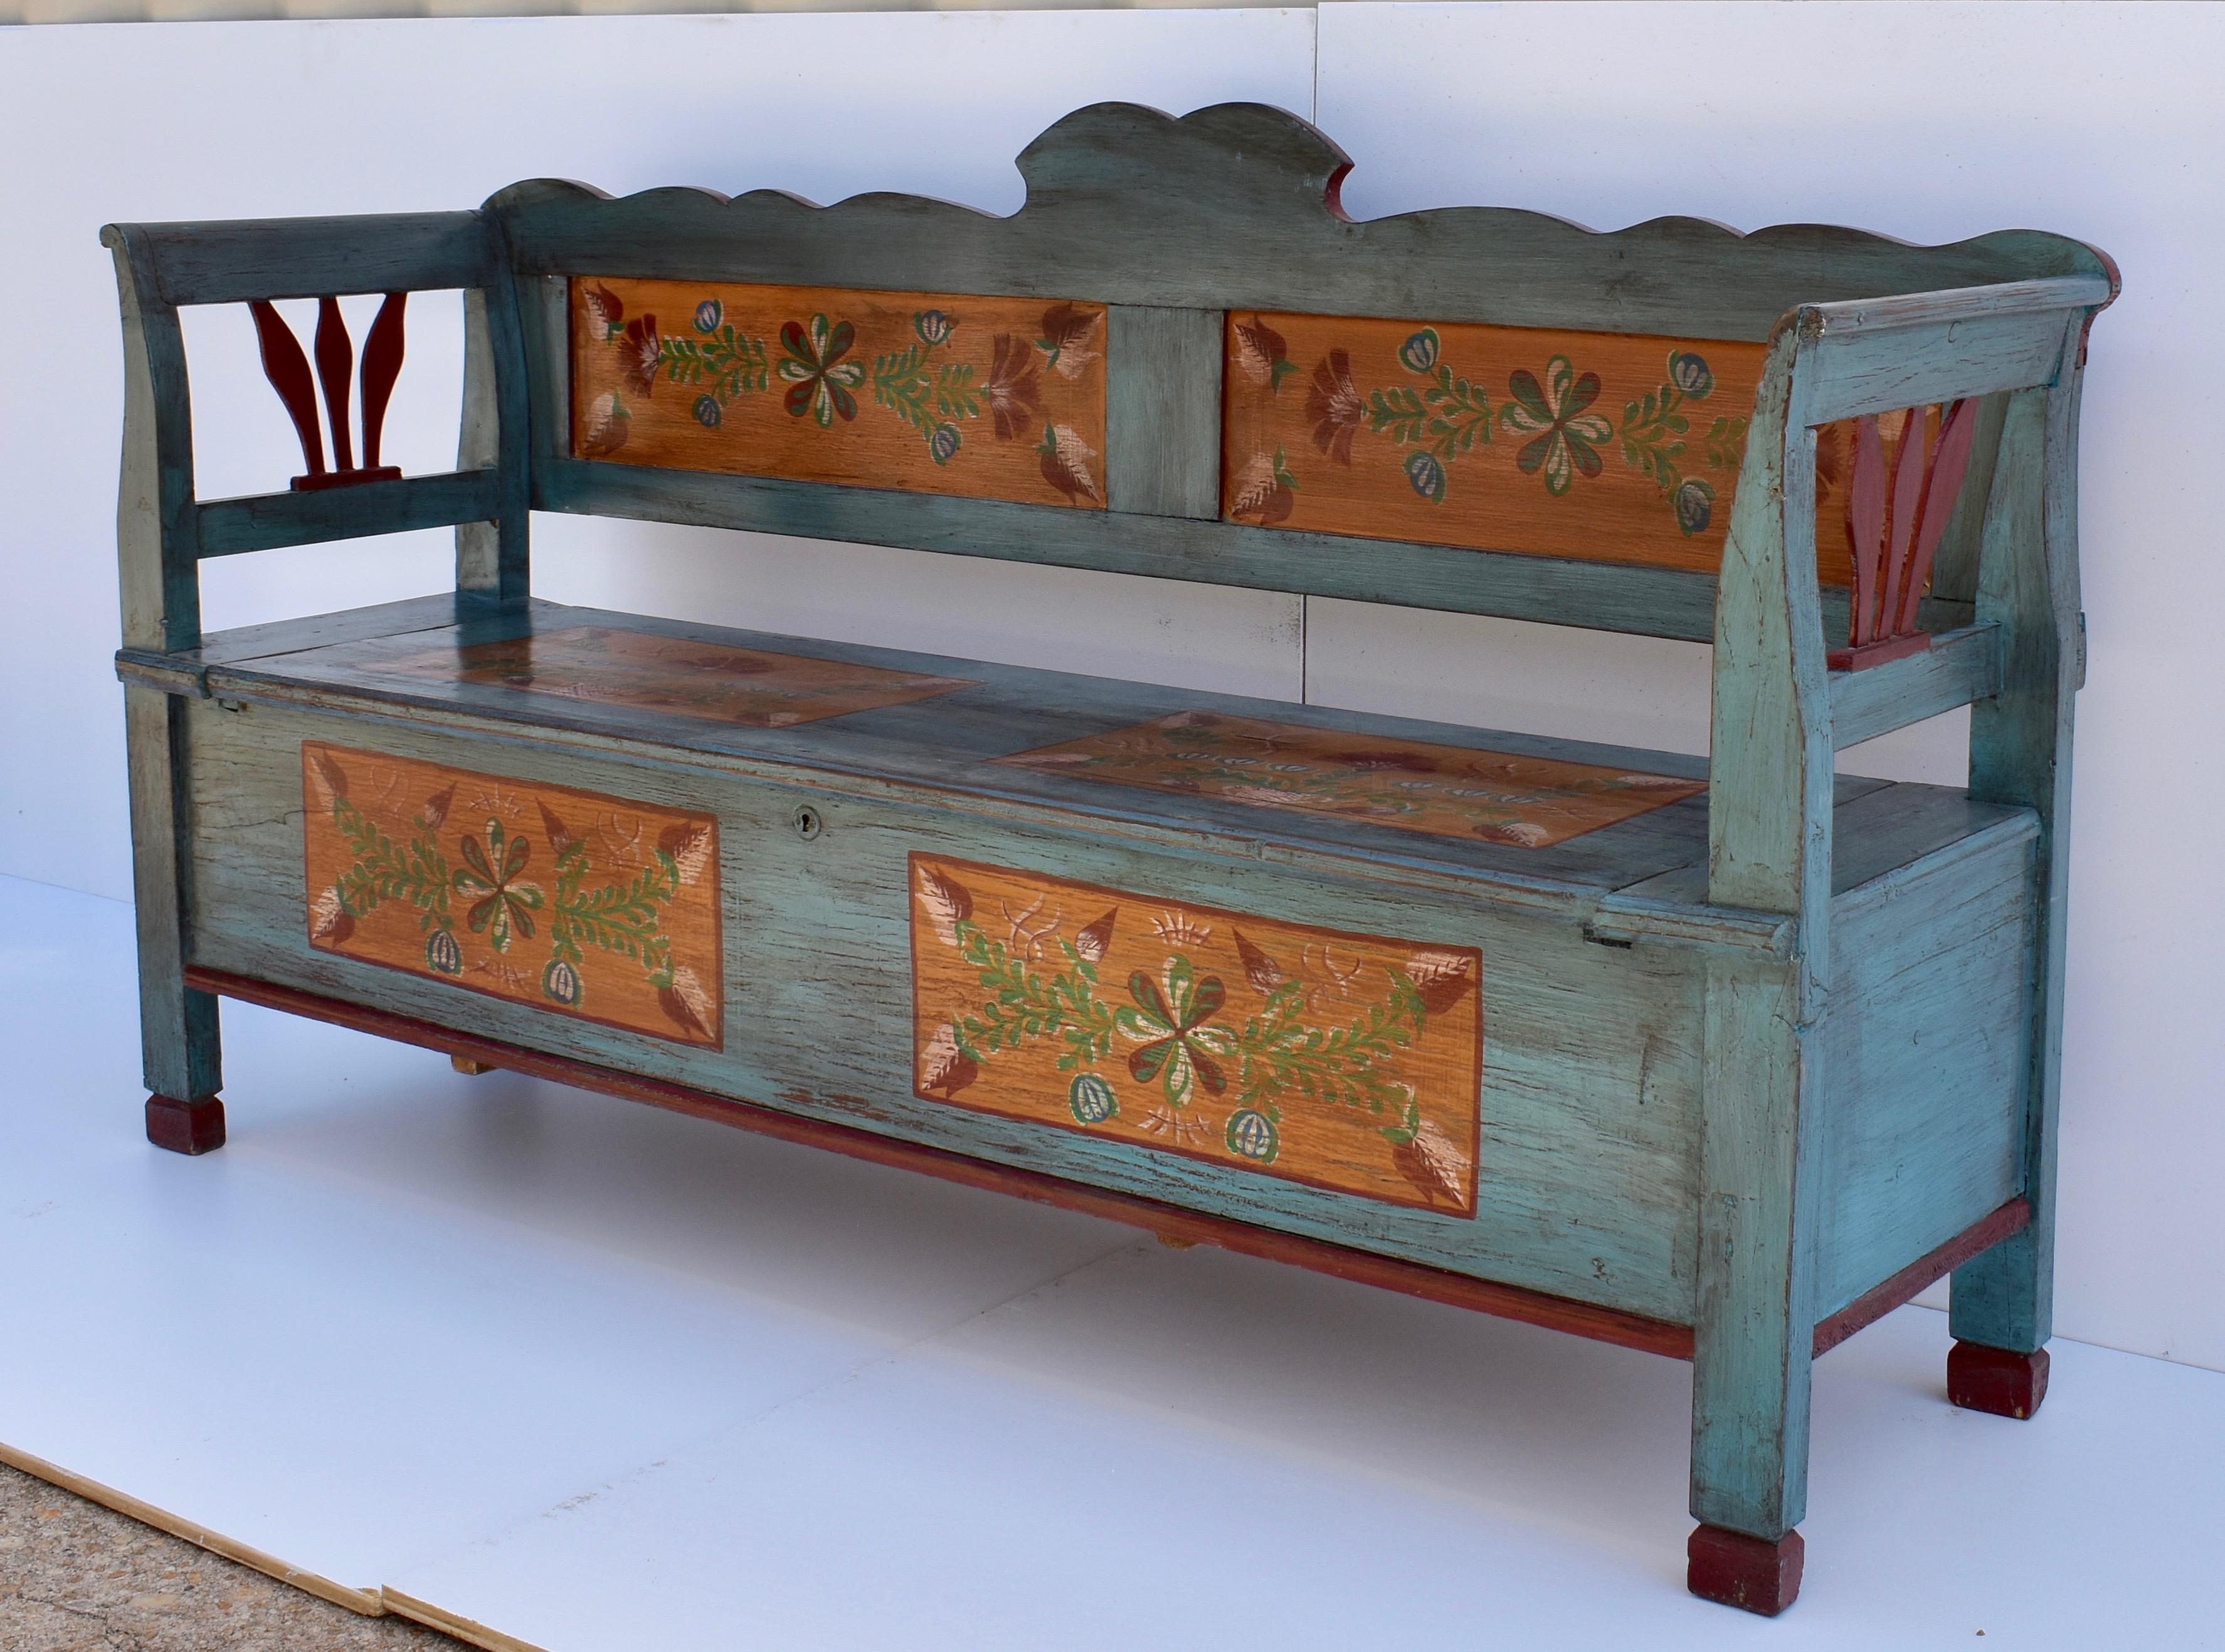 This handsome and stately antique pine storage bench has been recently painted by an accomplished Hungarian folk artist. The scalloped back rail rests above two flat panels. The integral legs and arms are gently scrolled at the top. The seat lifts